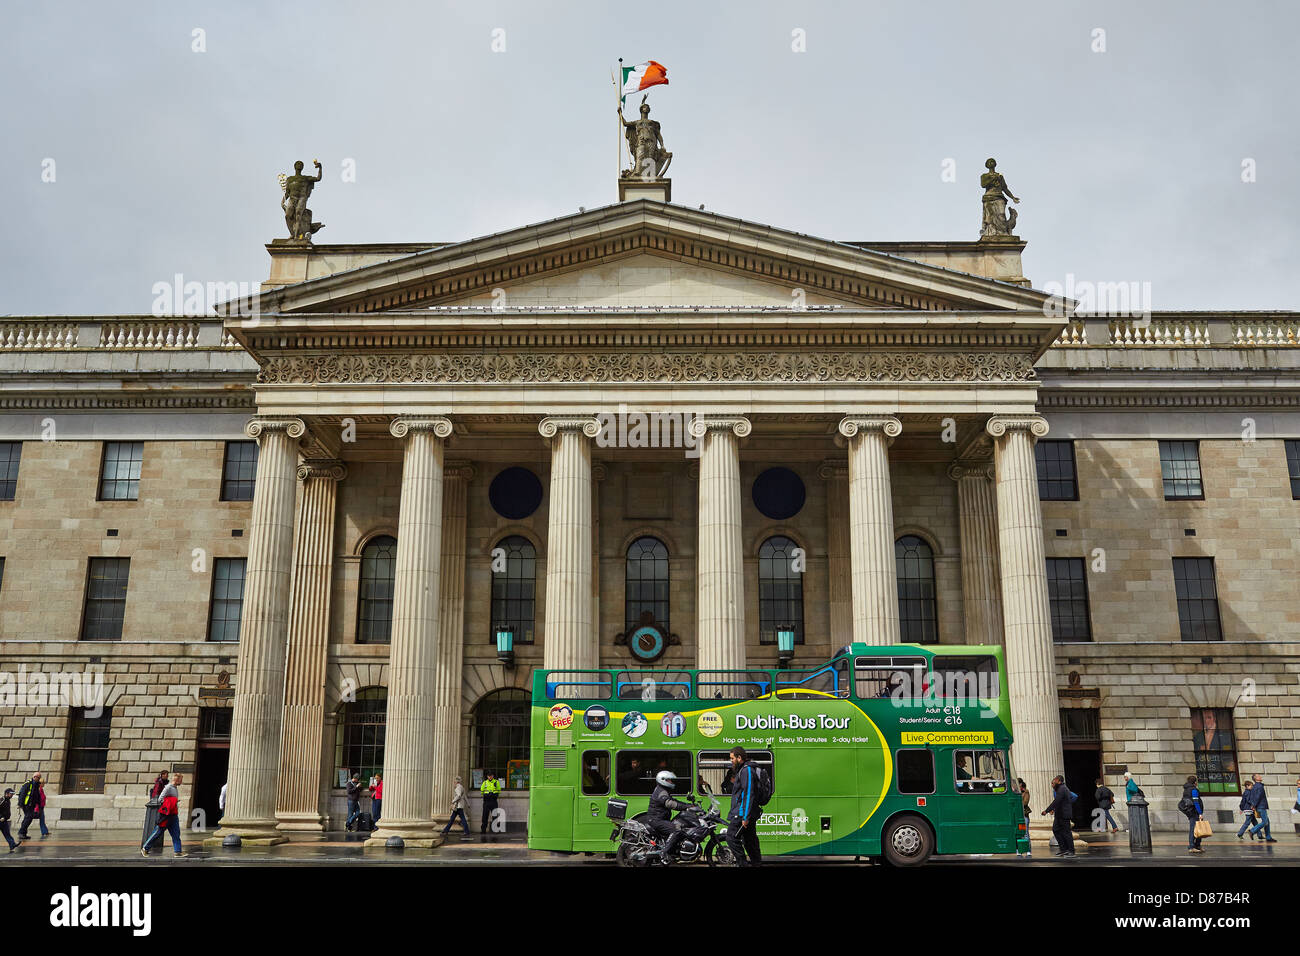 Dublin city tour bus in front of the general post office, O'Connell Street, Dublin, Republic of Ireland Stock Photo